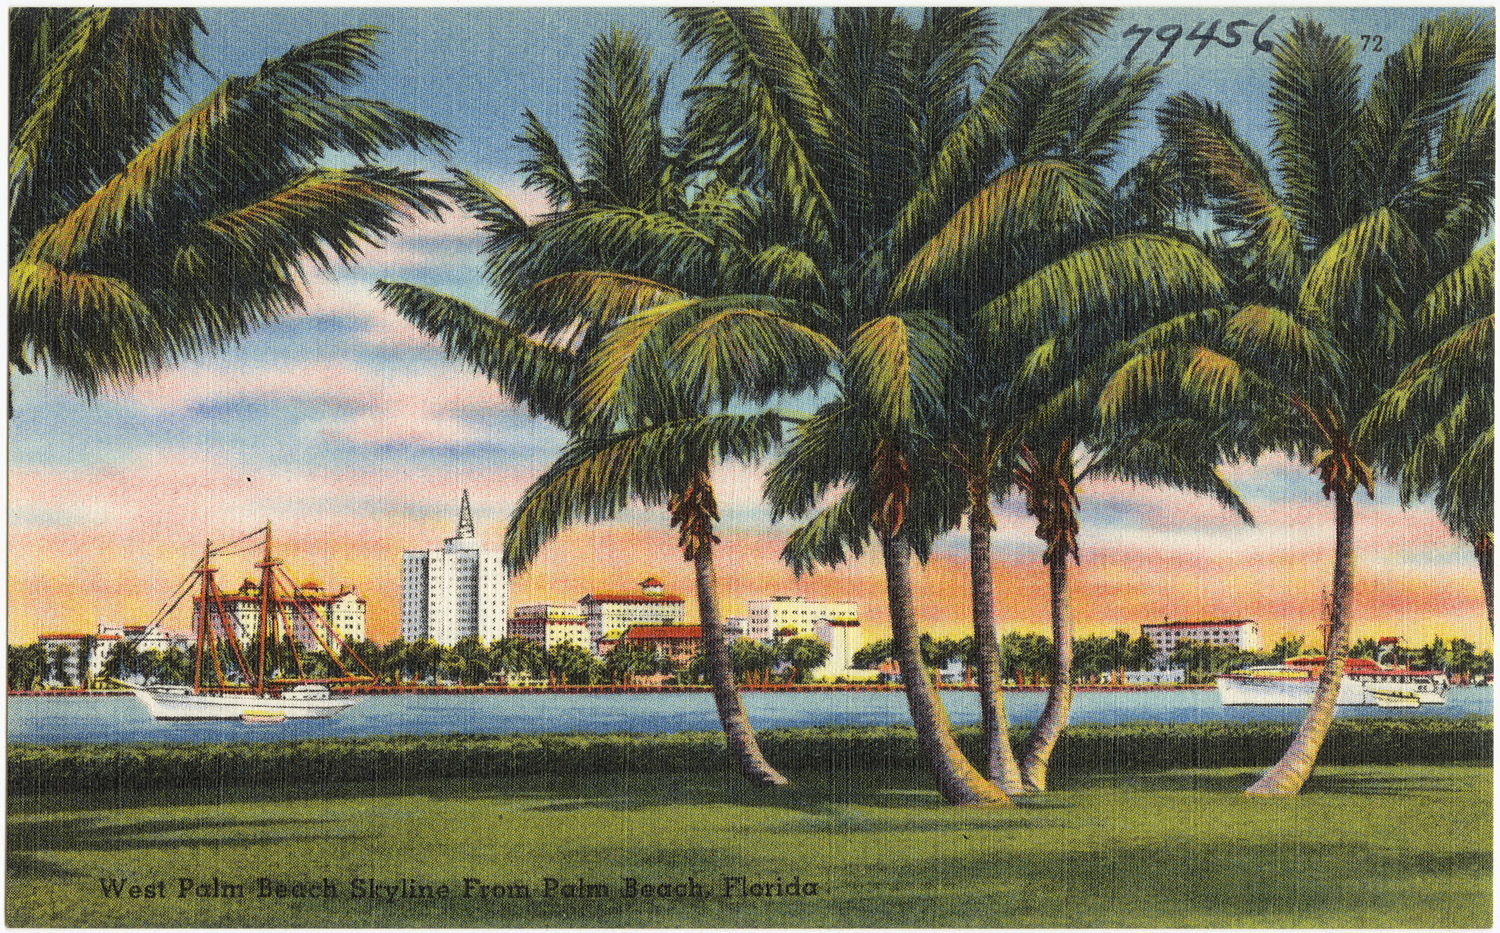 a painting of palm trees in the foreground, and a city skyline in the background